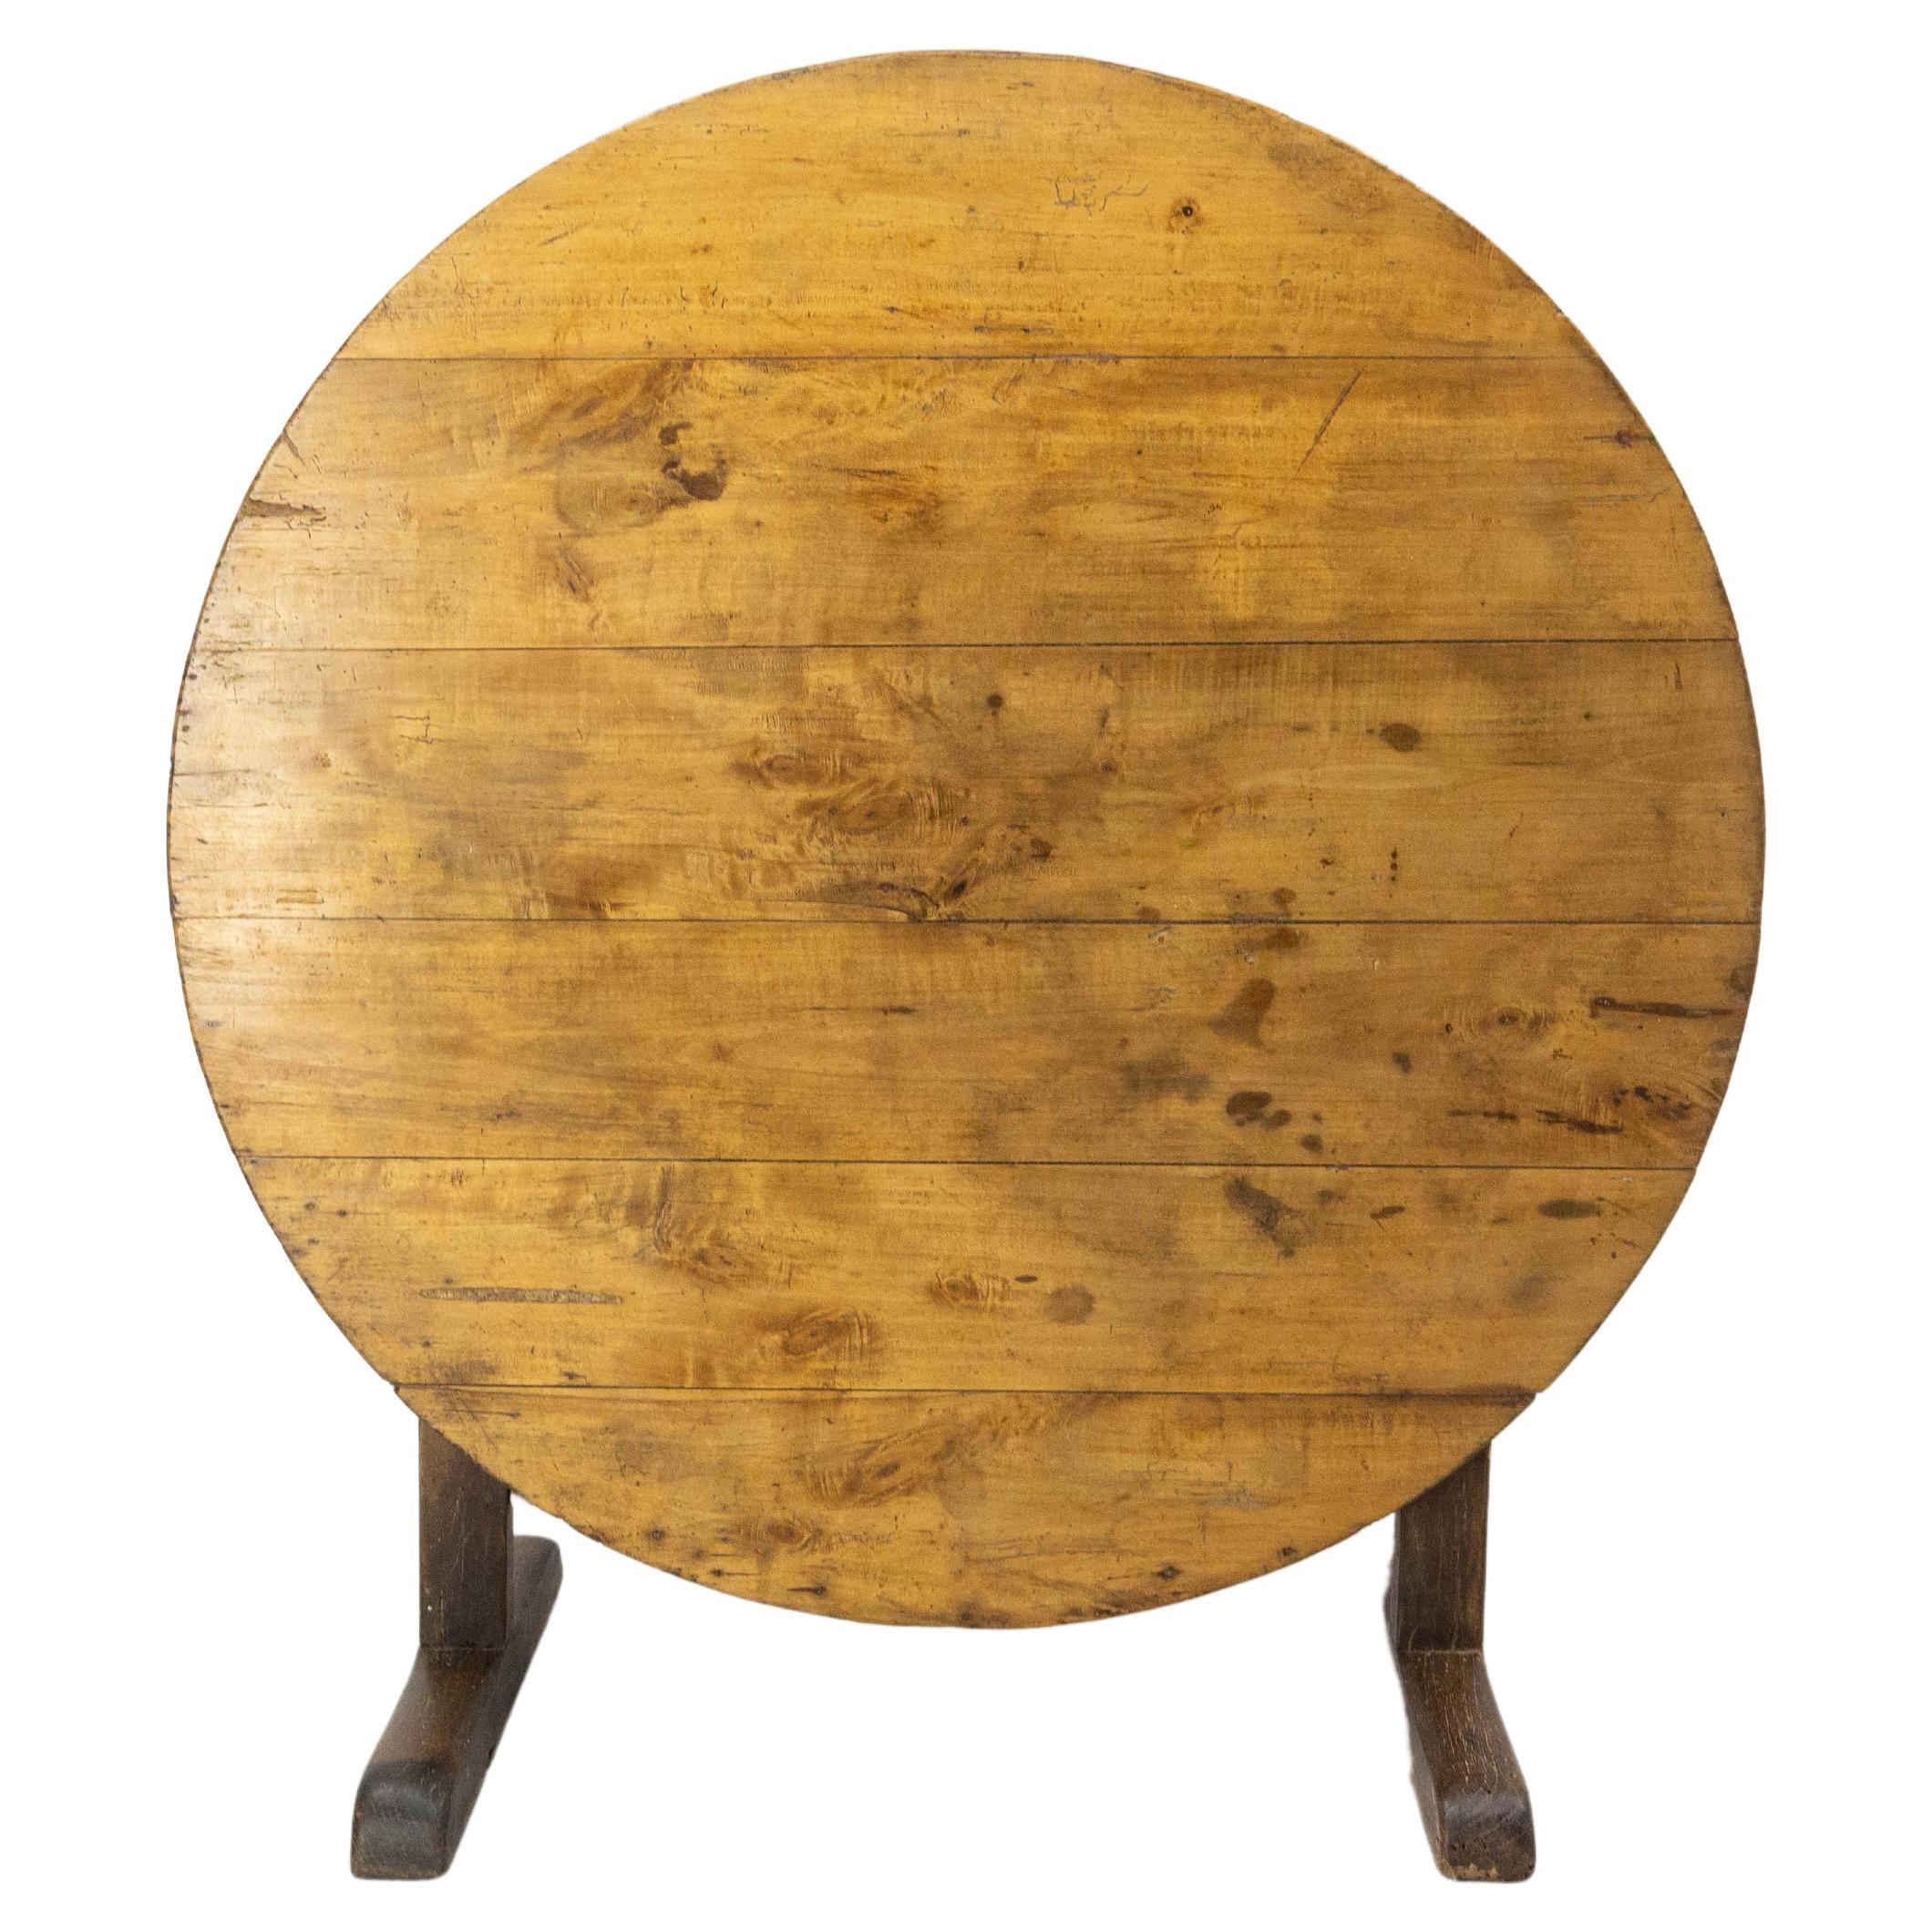 French Foldable Oak & Poplar Table Called Winemaker's Table, 19th Century For Sale